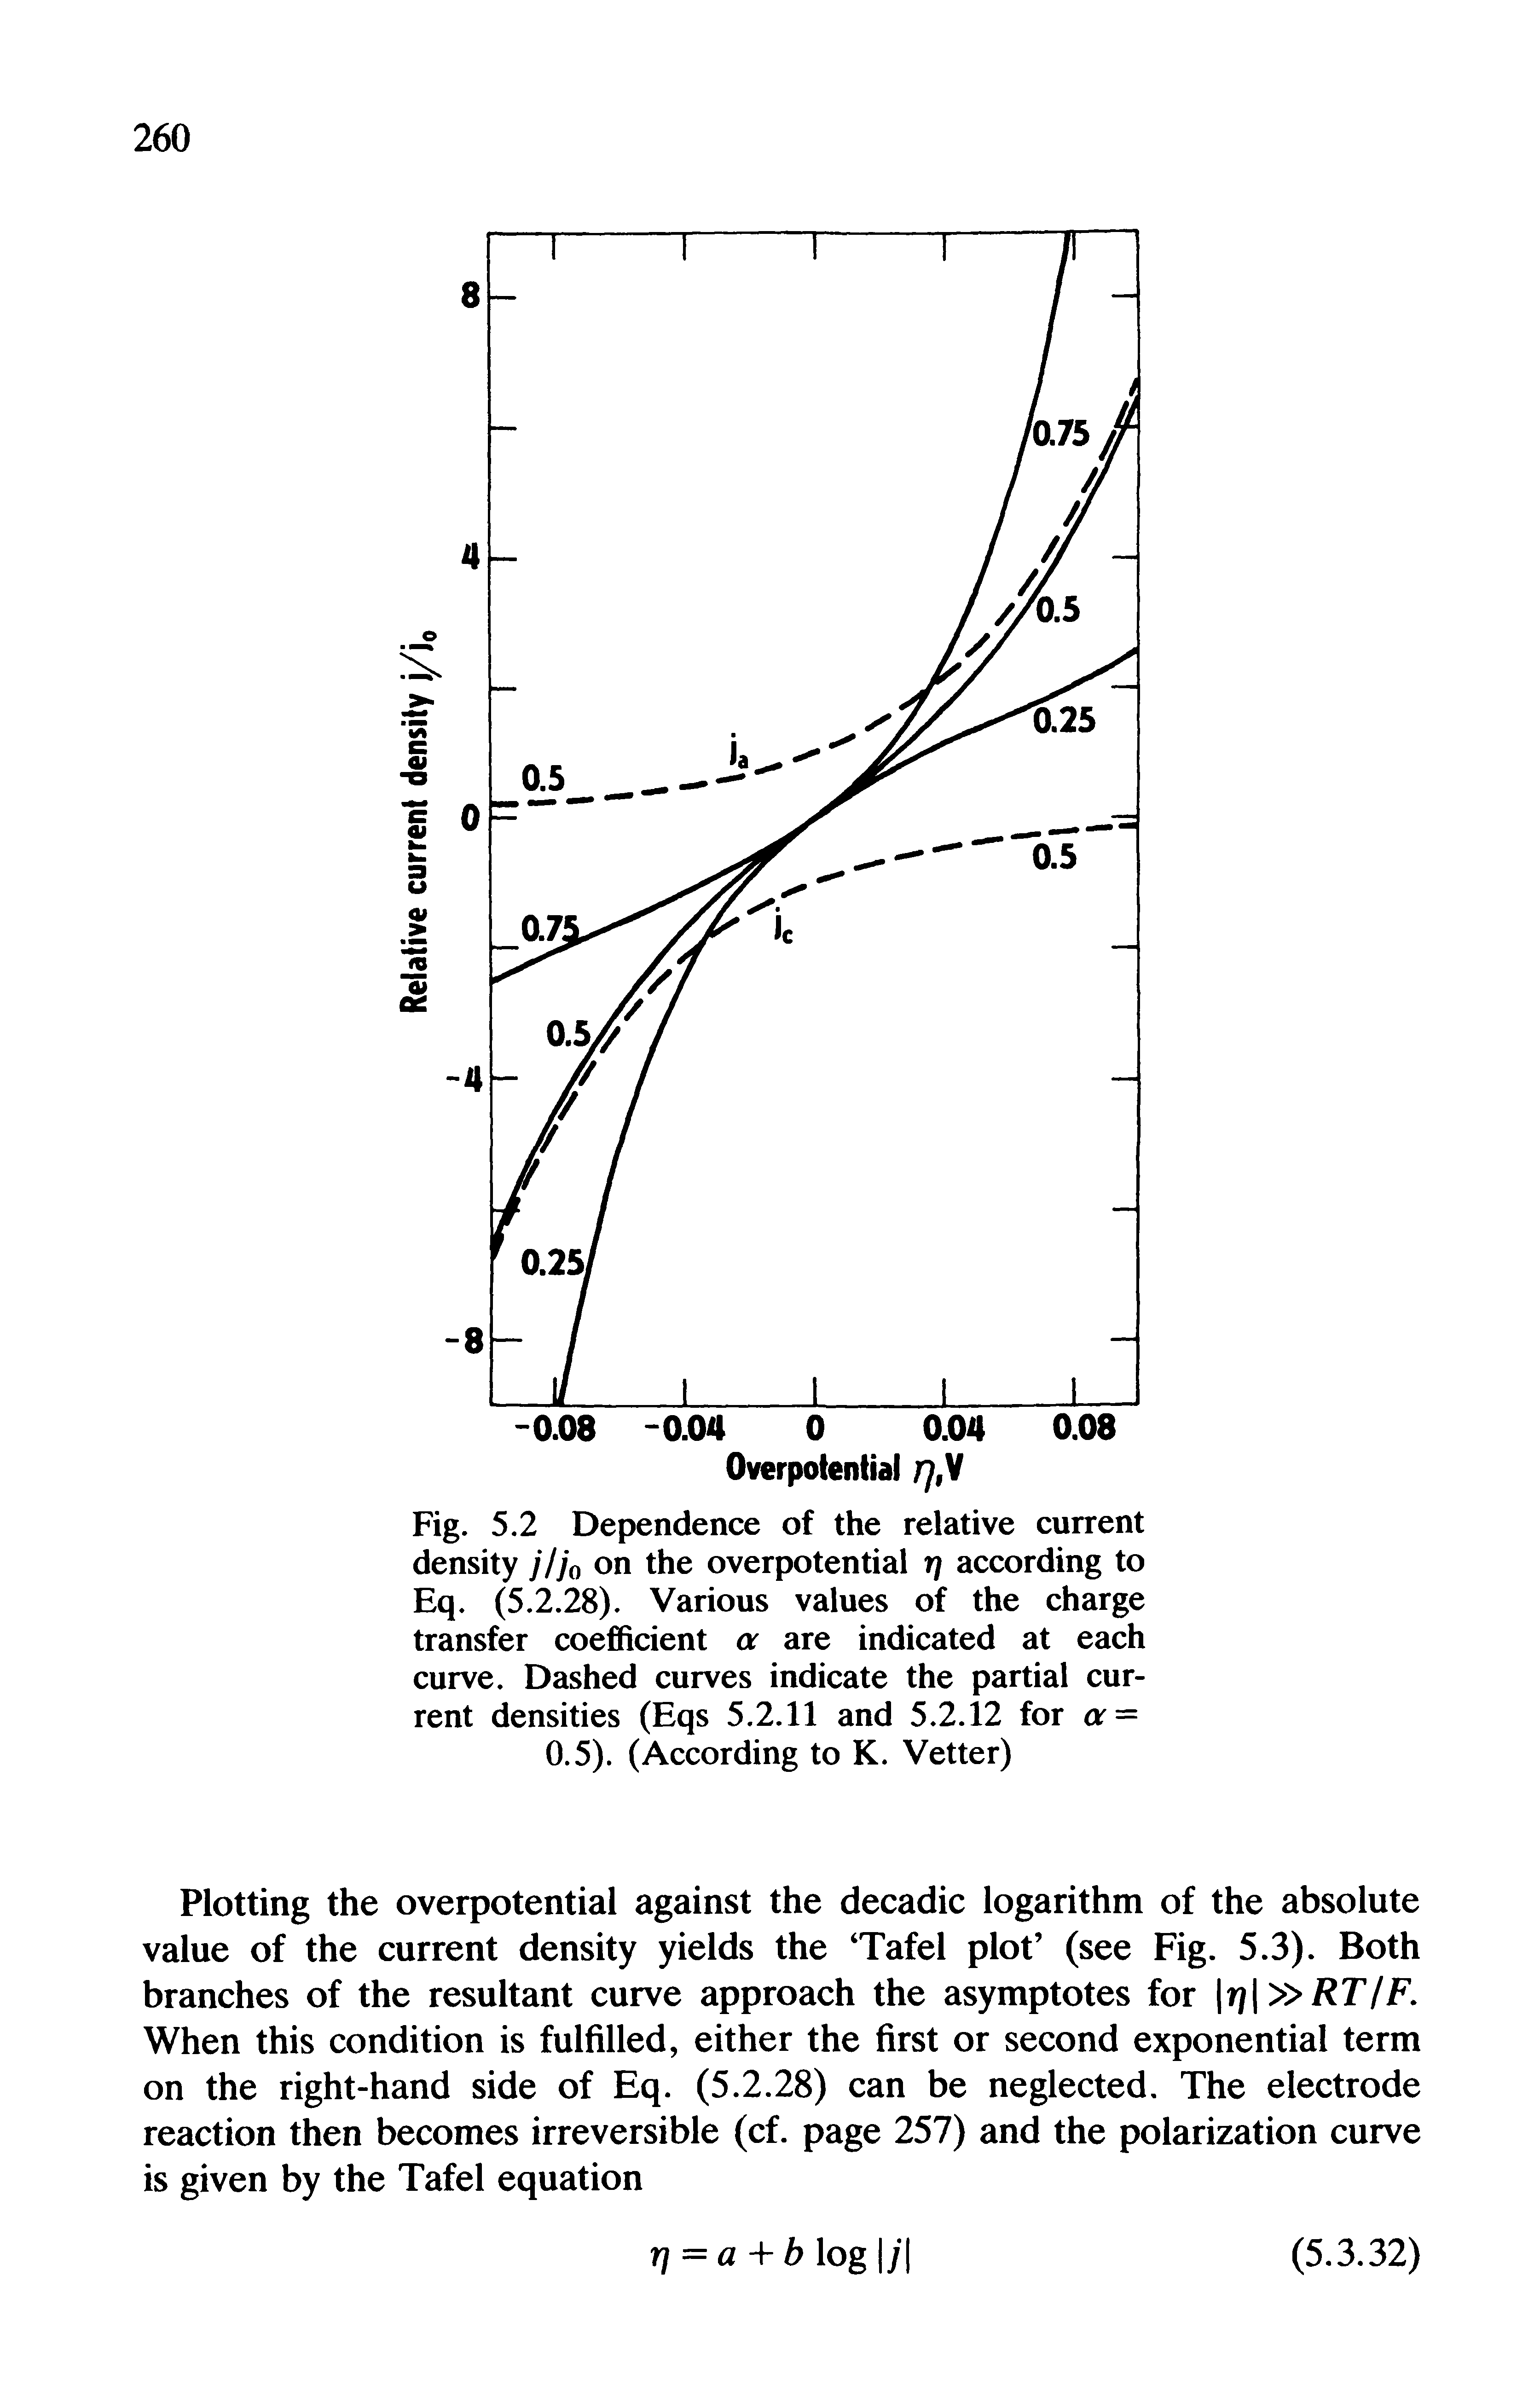 Fig. 5.2 Dependence of the relative current density j/j0 on the overpotential rj according to Eq. (5.2.28). Various values of the charge transfer coefficient a are indicated at each curve. Dashed curves indicate the partial current densities (Eqs 5.2.11 and 5.2.12 for a = 0.5). (According to K. Vetter)...